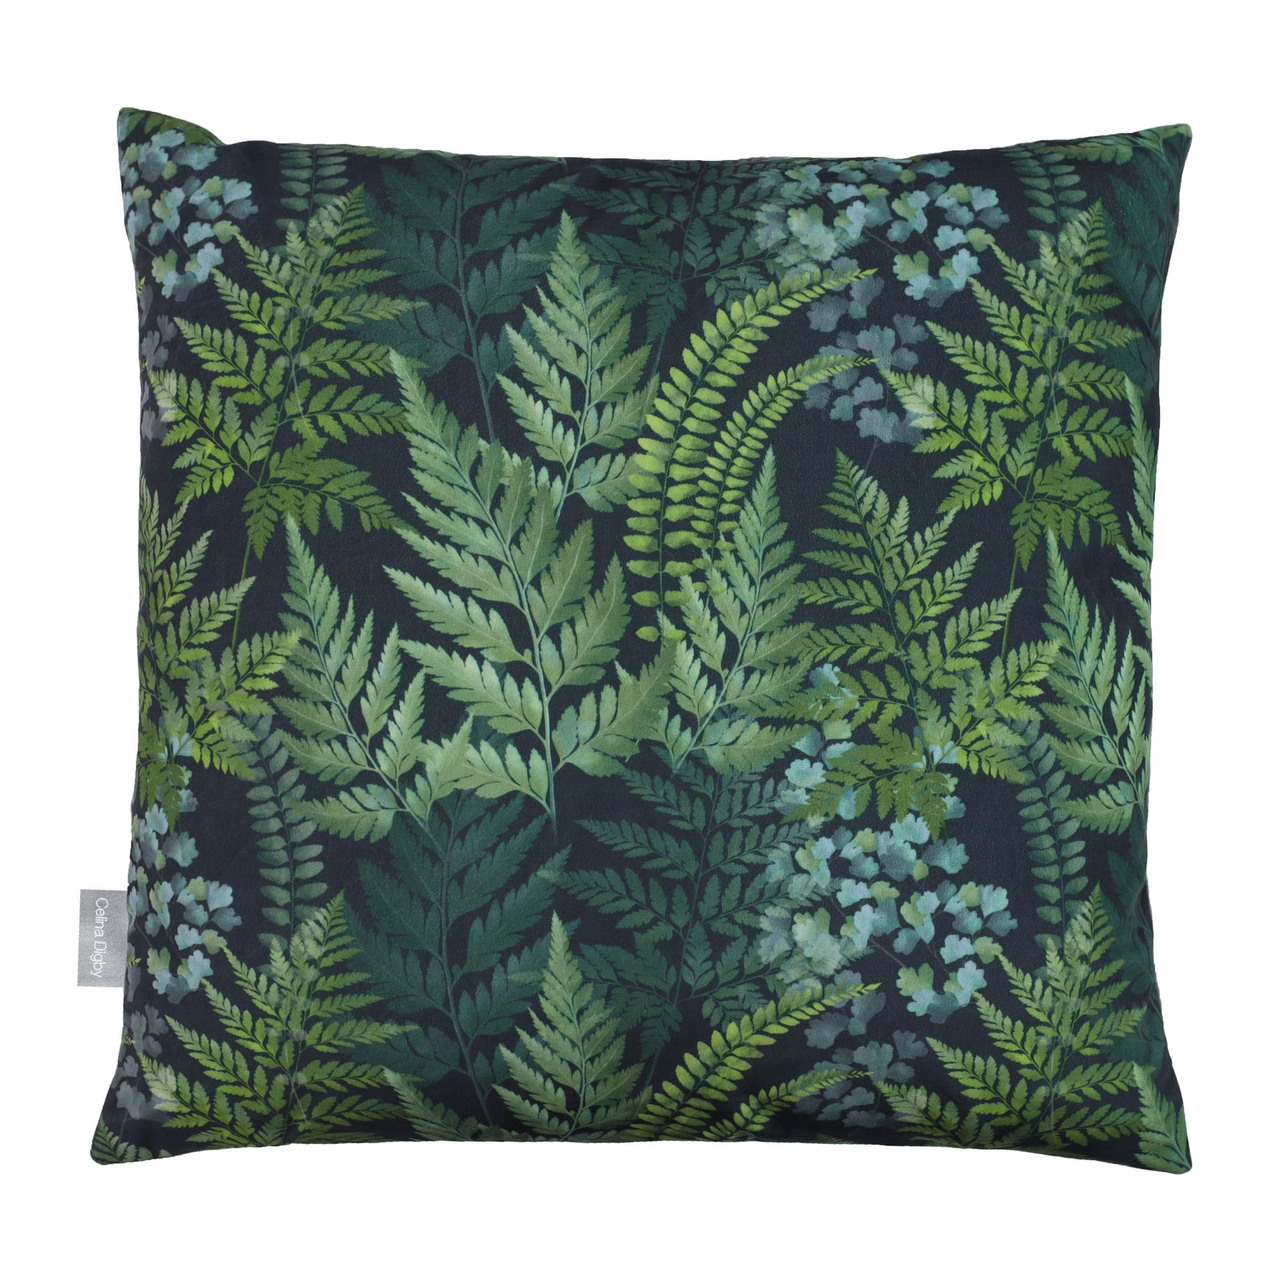 Celina Digby Luxury Opulent Super Soft Velvet Cushion – Ferns (Available in 2 Sizes) Standard (45x45cm) Hollow Fibre Filling